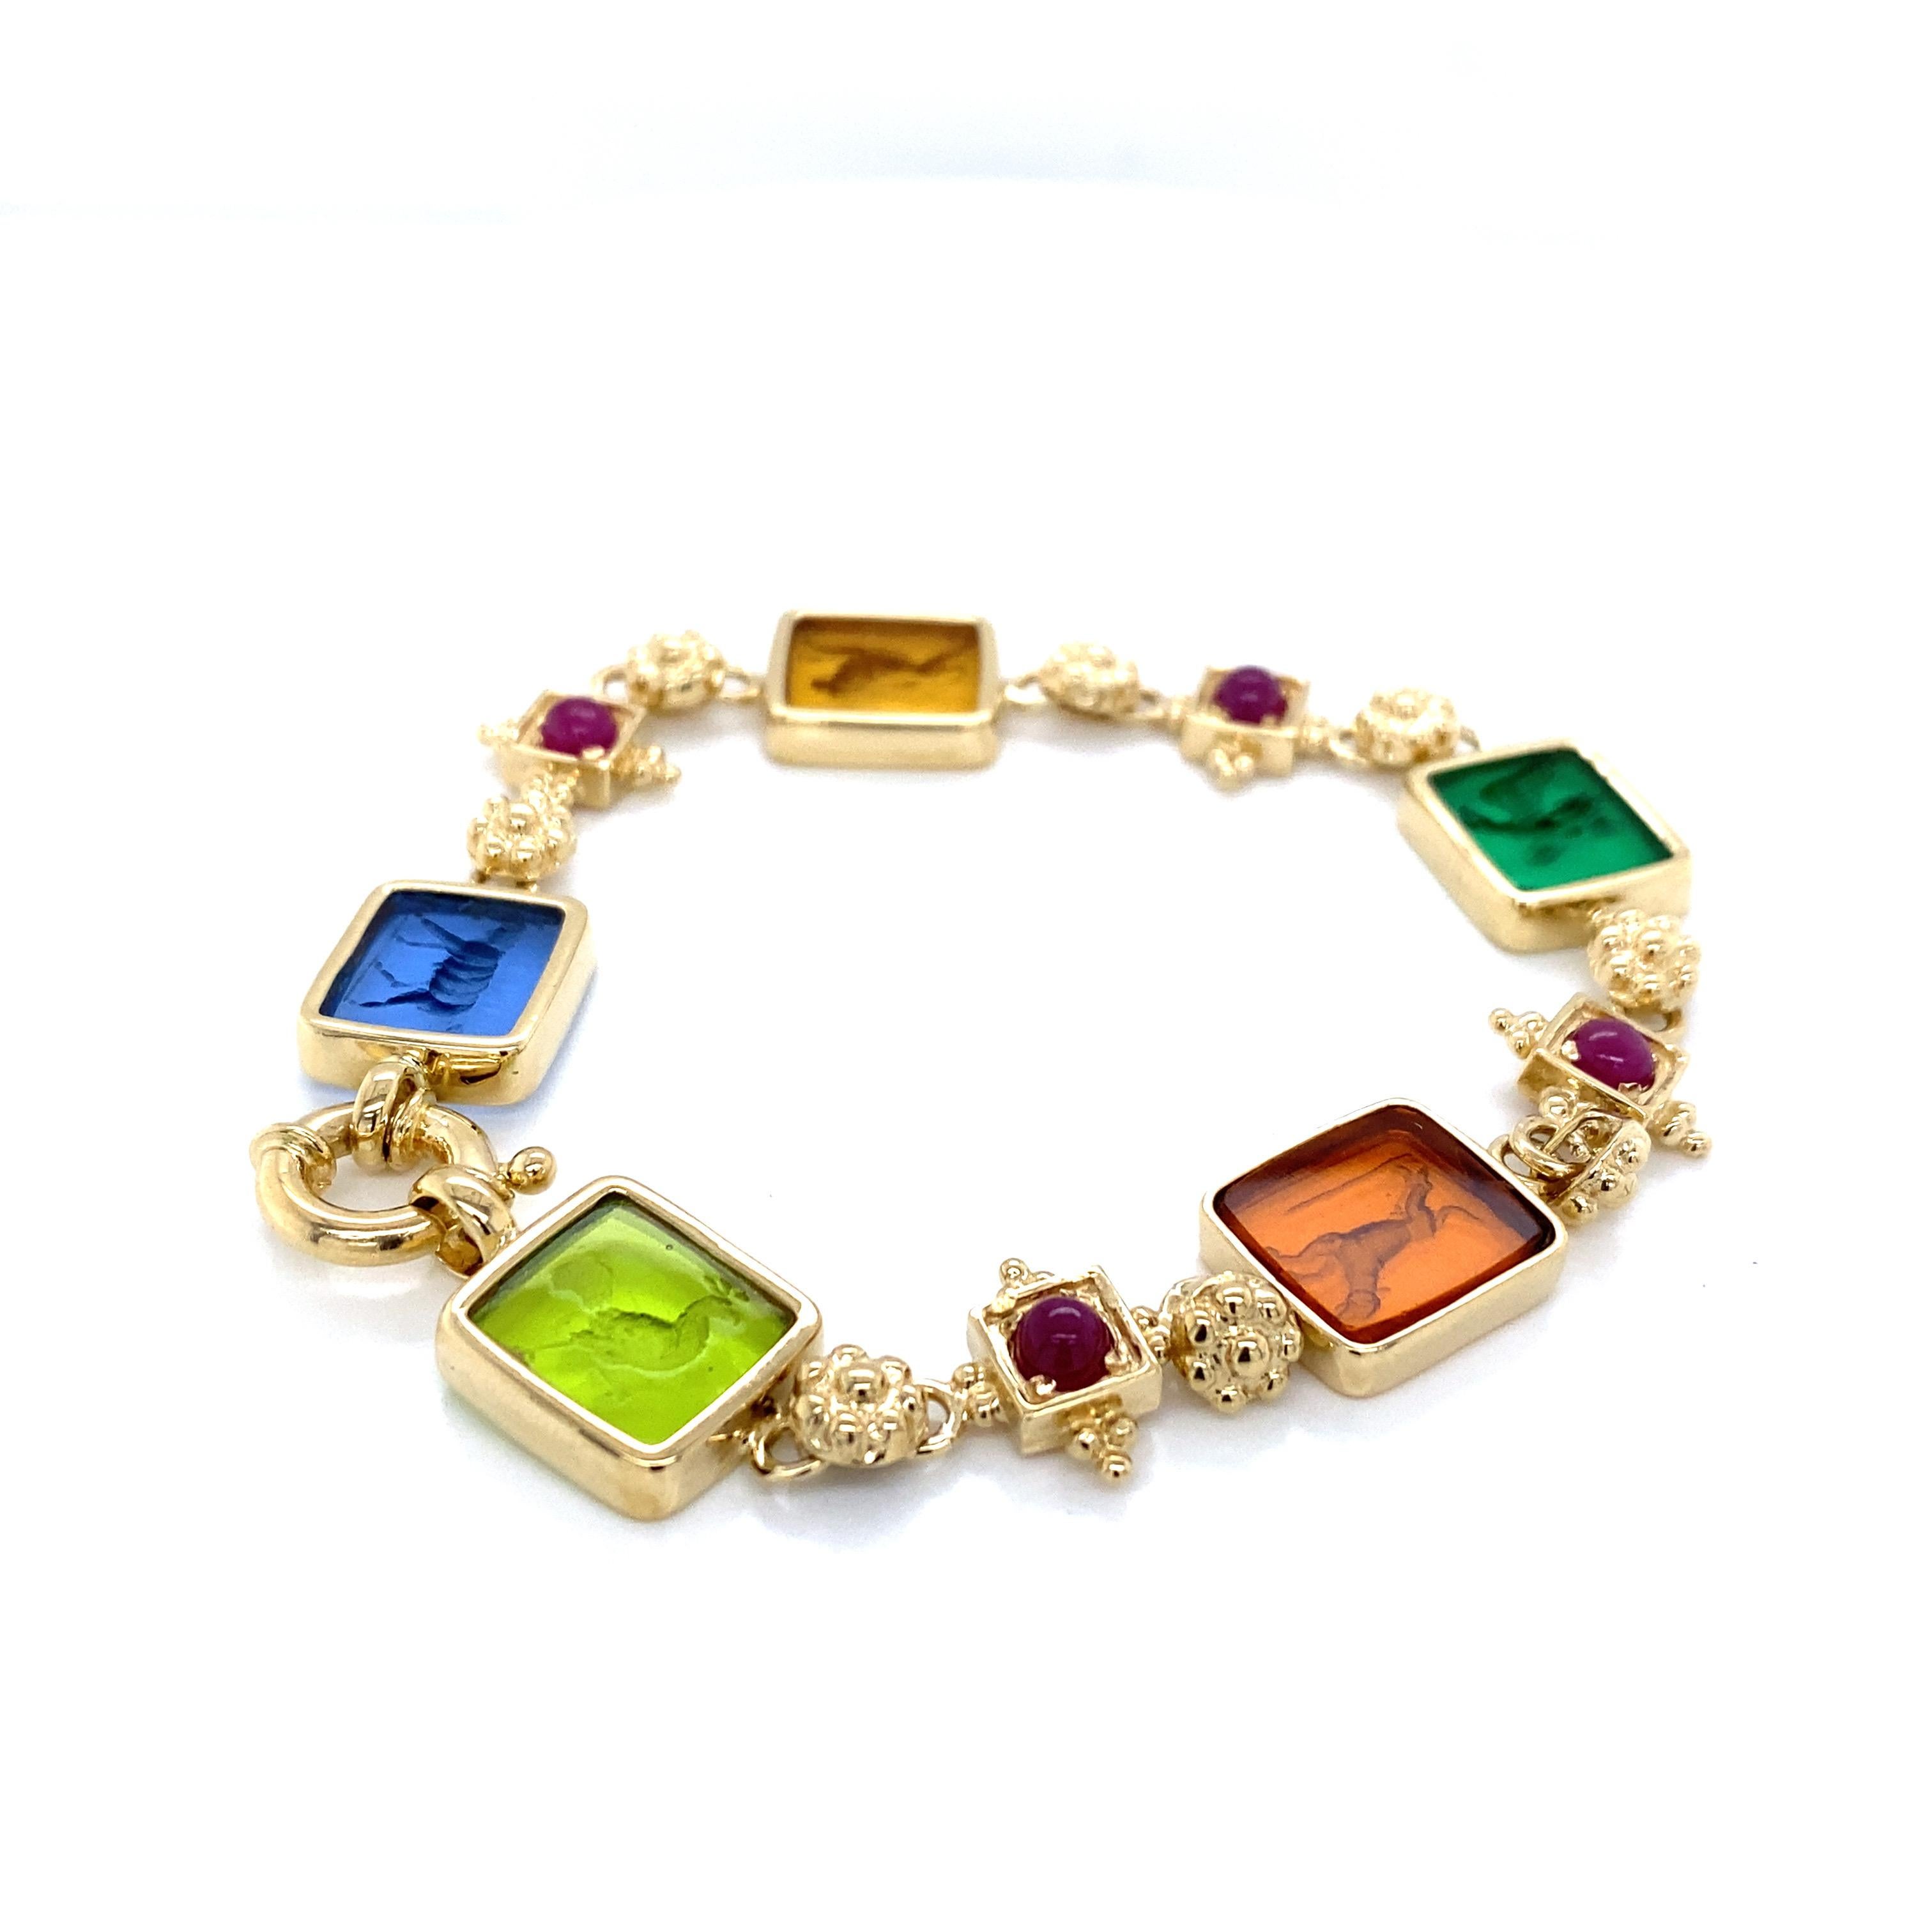 Tagliamonte Ruby Colored Venetian Glass Bracelet in 14K Yellow Gold.  (4) Ruby Gemstones weighing 1.0 carat total weight are expertly set in stations between the colored etched bezel set glass.  The Bracelet measures 7 1/2 inch in length and 1/2